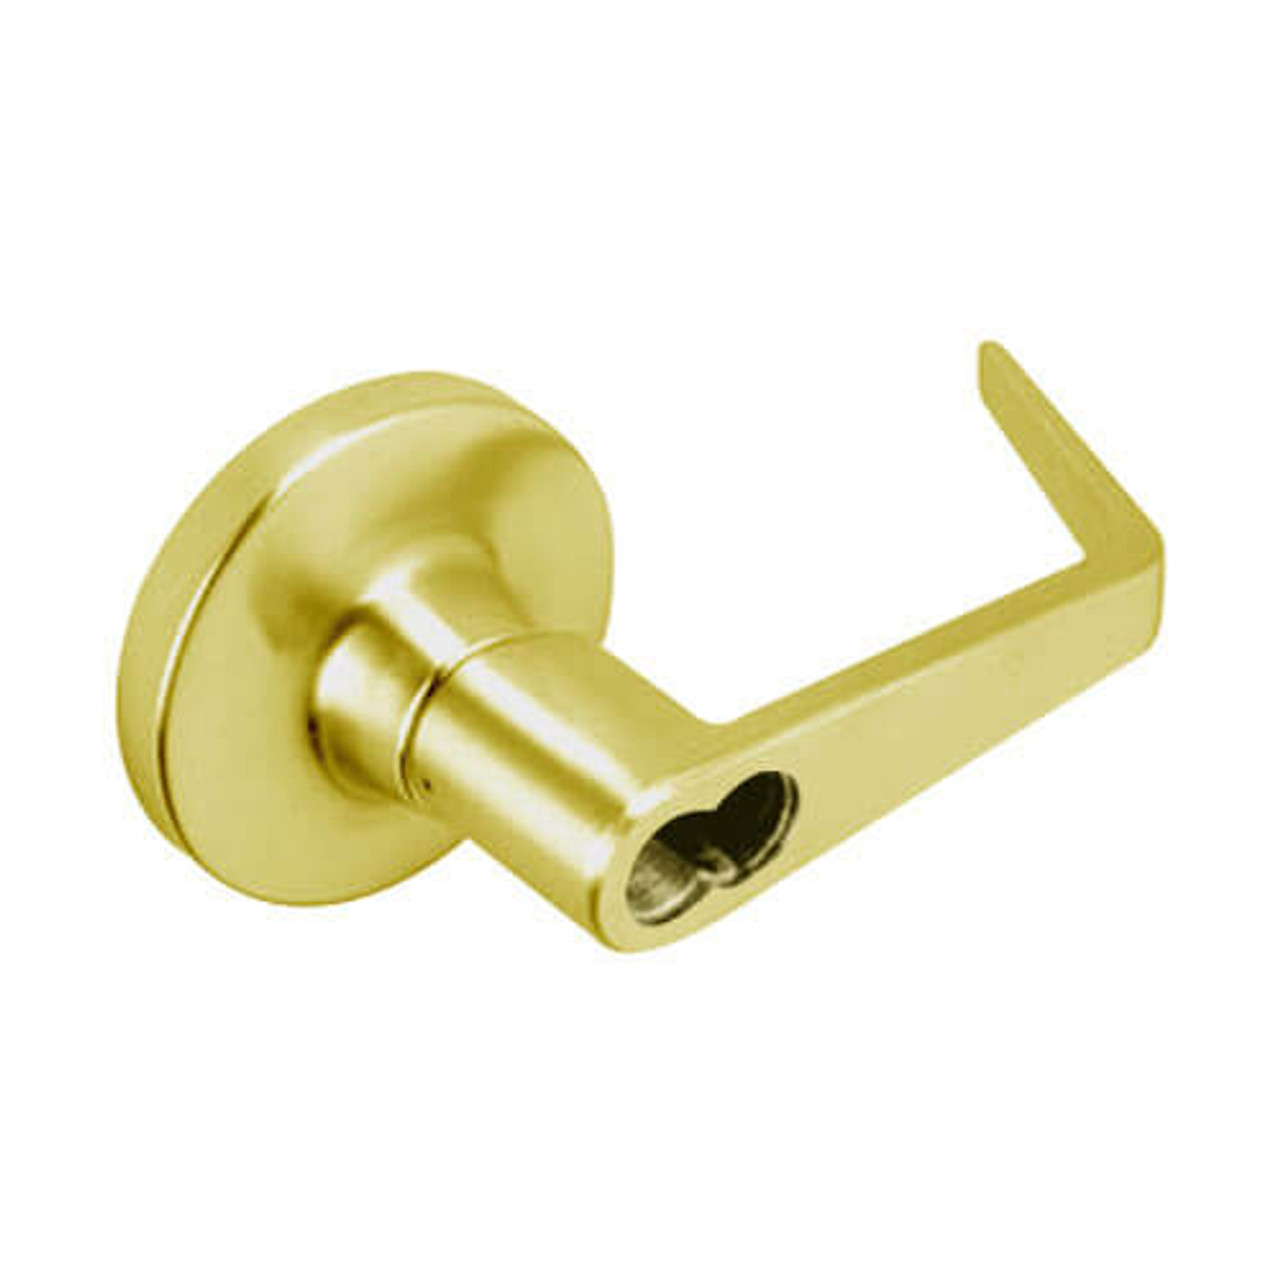 MA431BD-DG-605 Falcon Mortise Locks MA Series Classroom Security with deadbolt with DG Lever in Bright Brass Finish